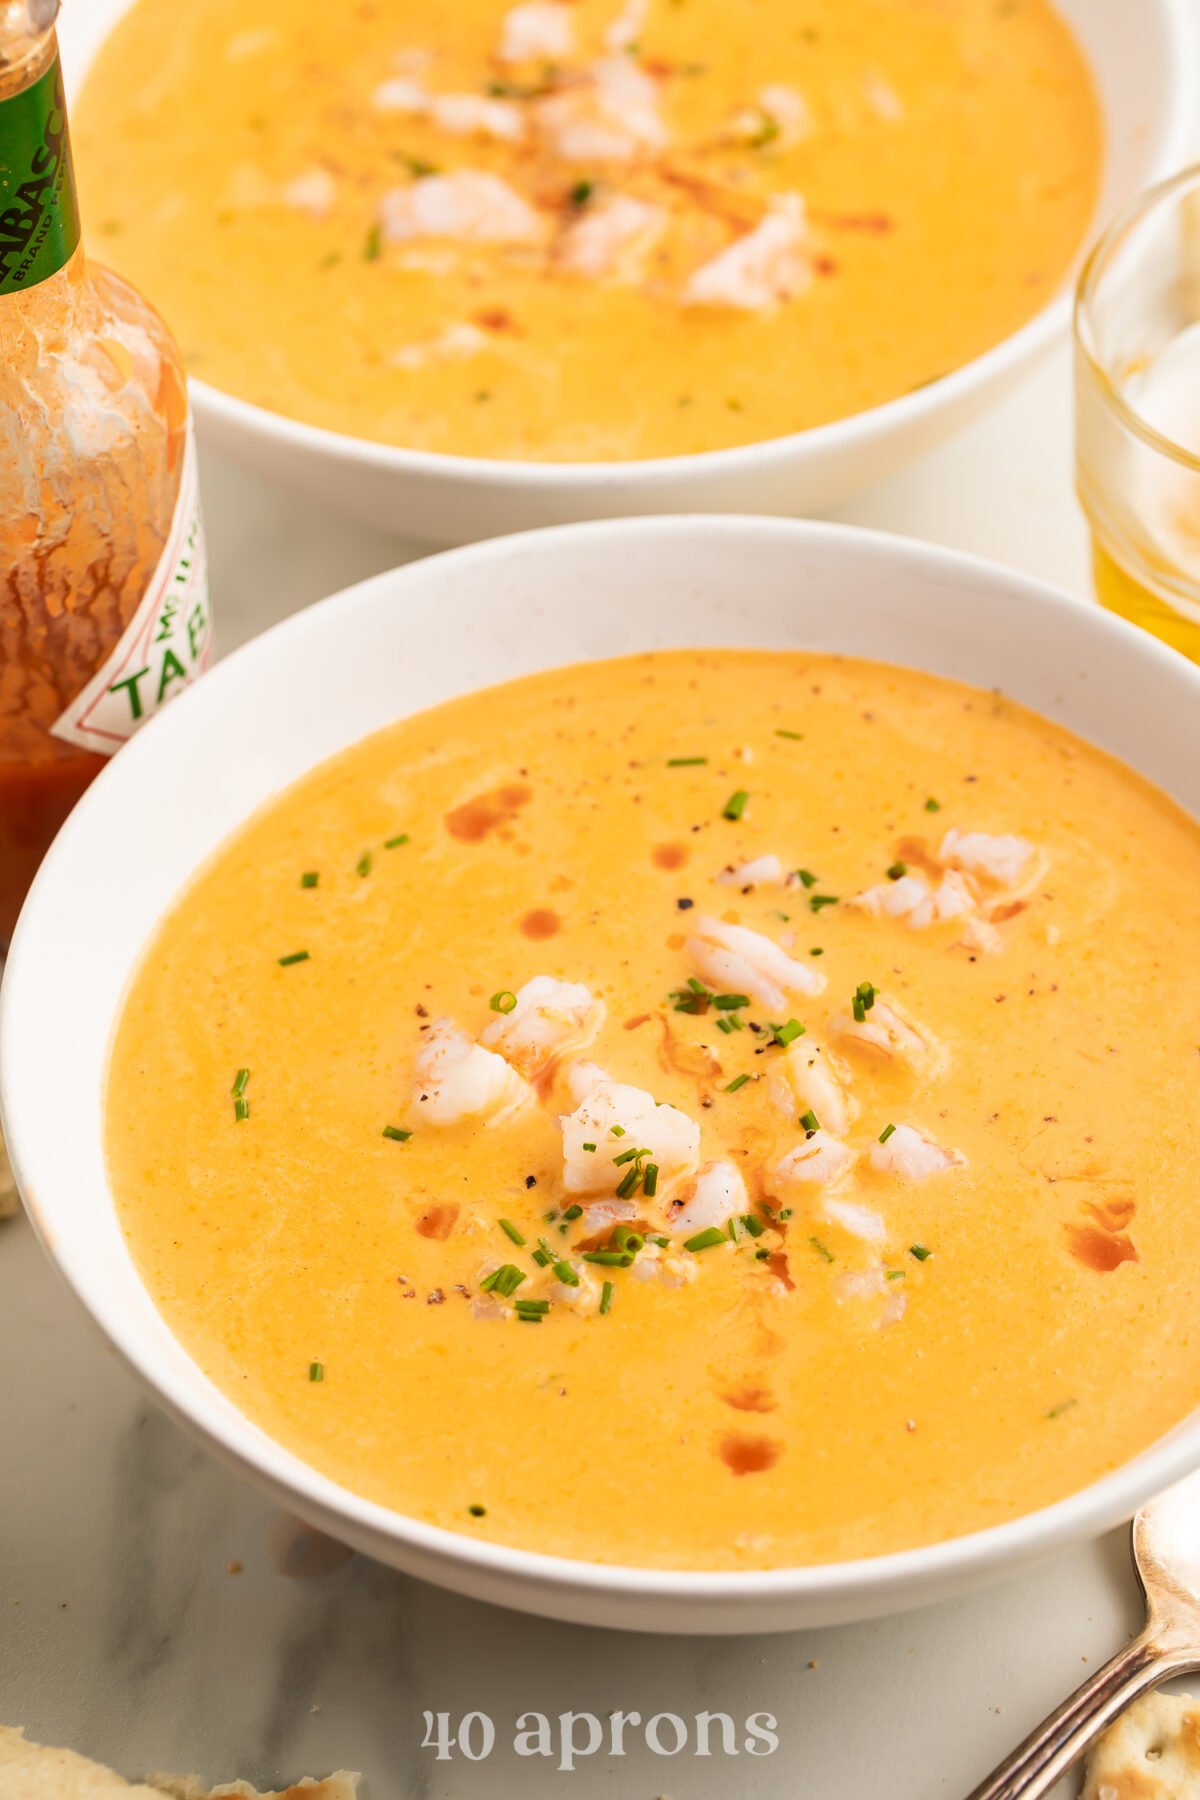 Angled look at two bowls of creamy, light orange shrimp bisque, with chunks of shrimp and dots of fresh herbs in the centers of each bowl.